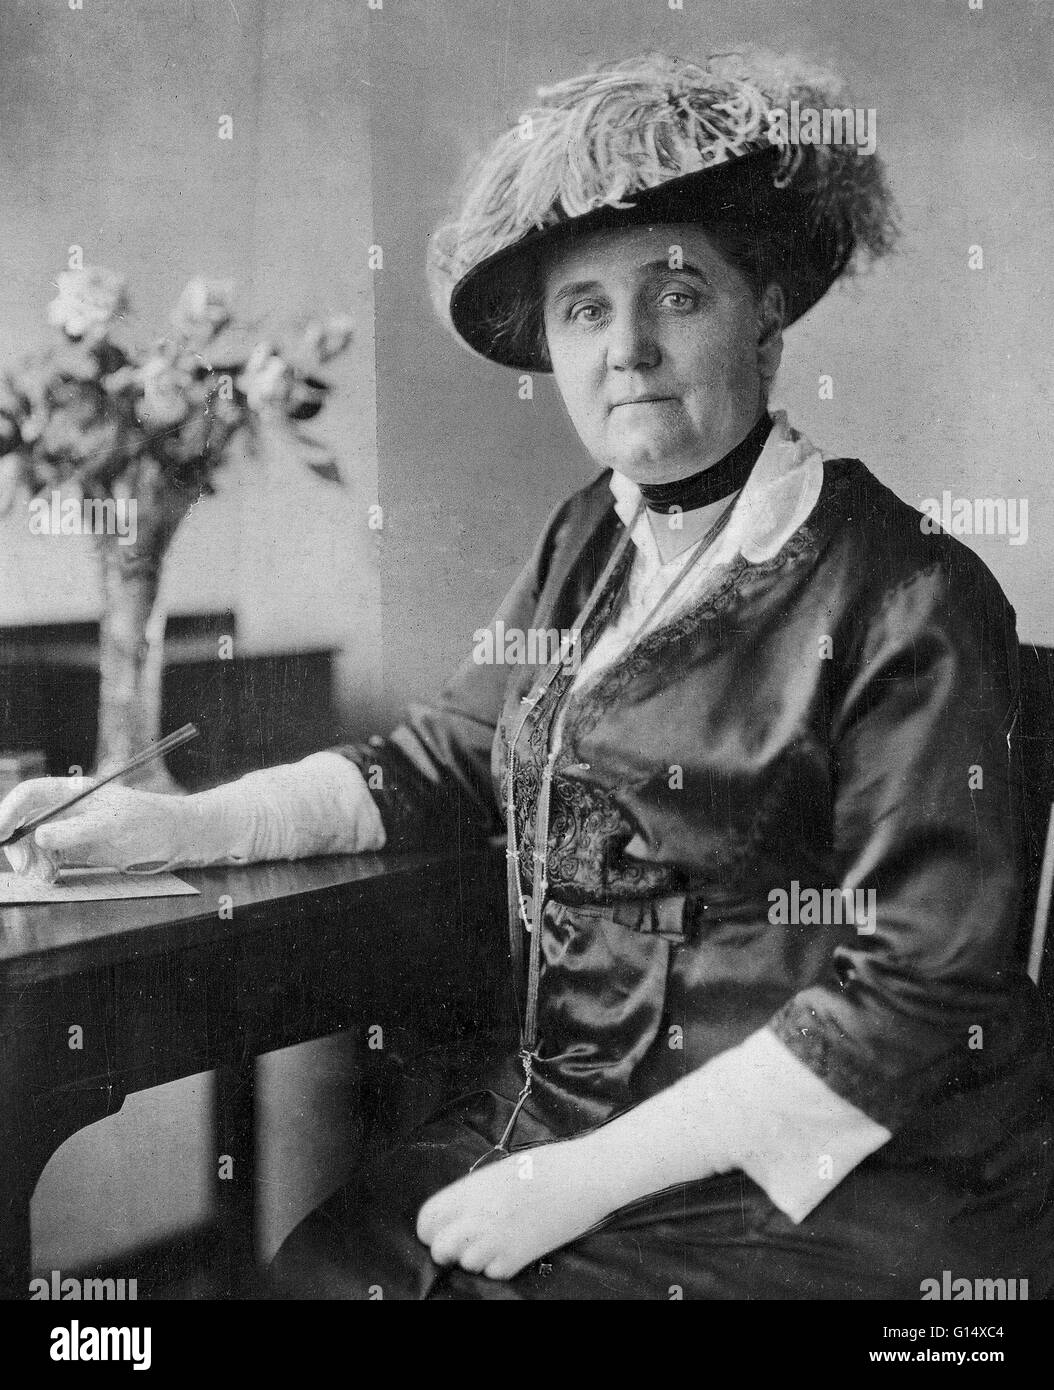 Jane Addams (September 6, 1860 - May 21, 1935) was a pioneer settlement worker, founder of Hull House in Chicago, public philosopher, sociologist, author, and leader in woman suffrage and world peace. She was one of the most prominent reformers of the Pro Stock Photo